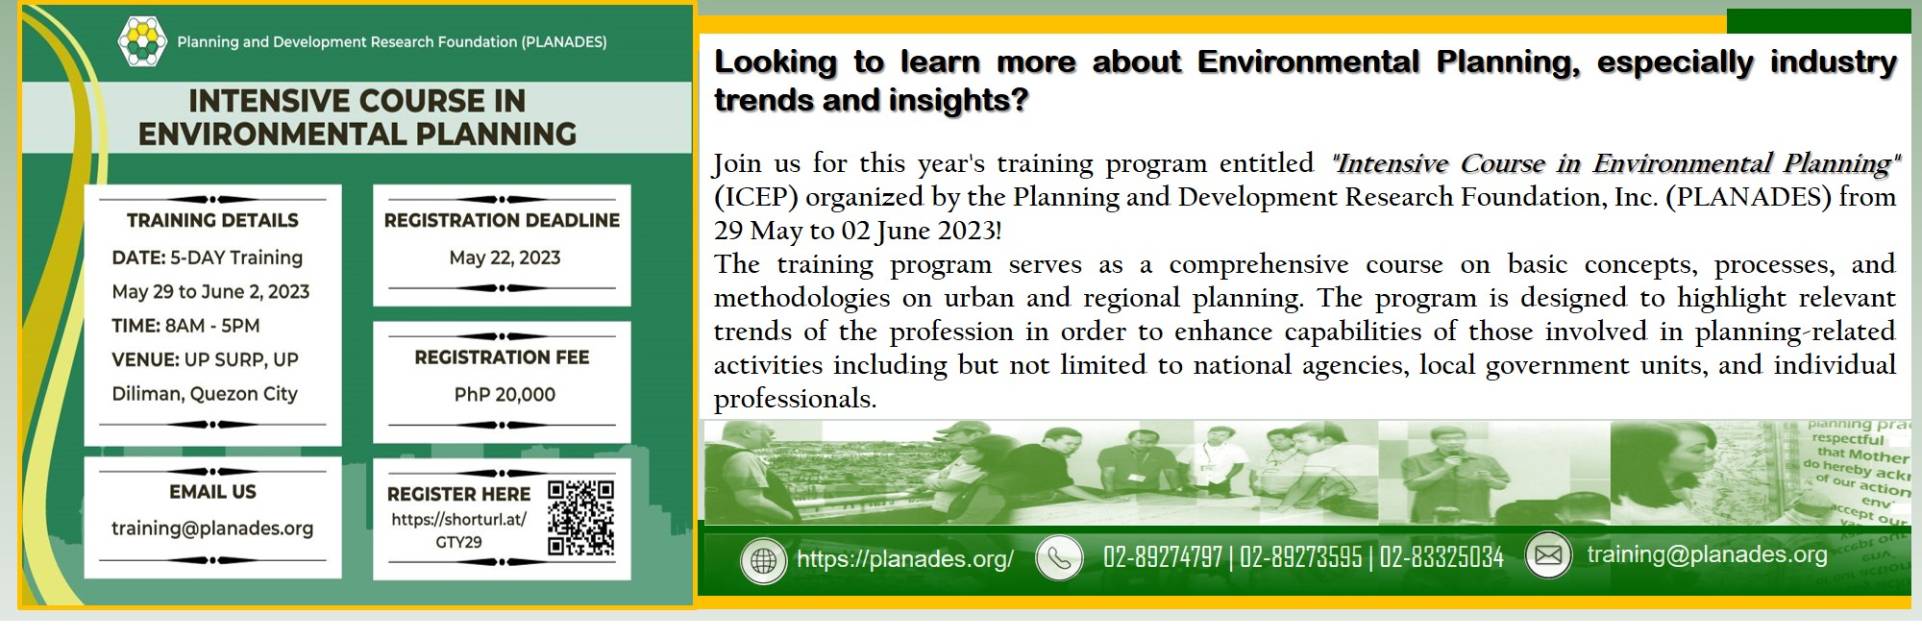  (U.P. Planning and Development Research Foundation, Inc. (UP PLANADES) 